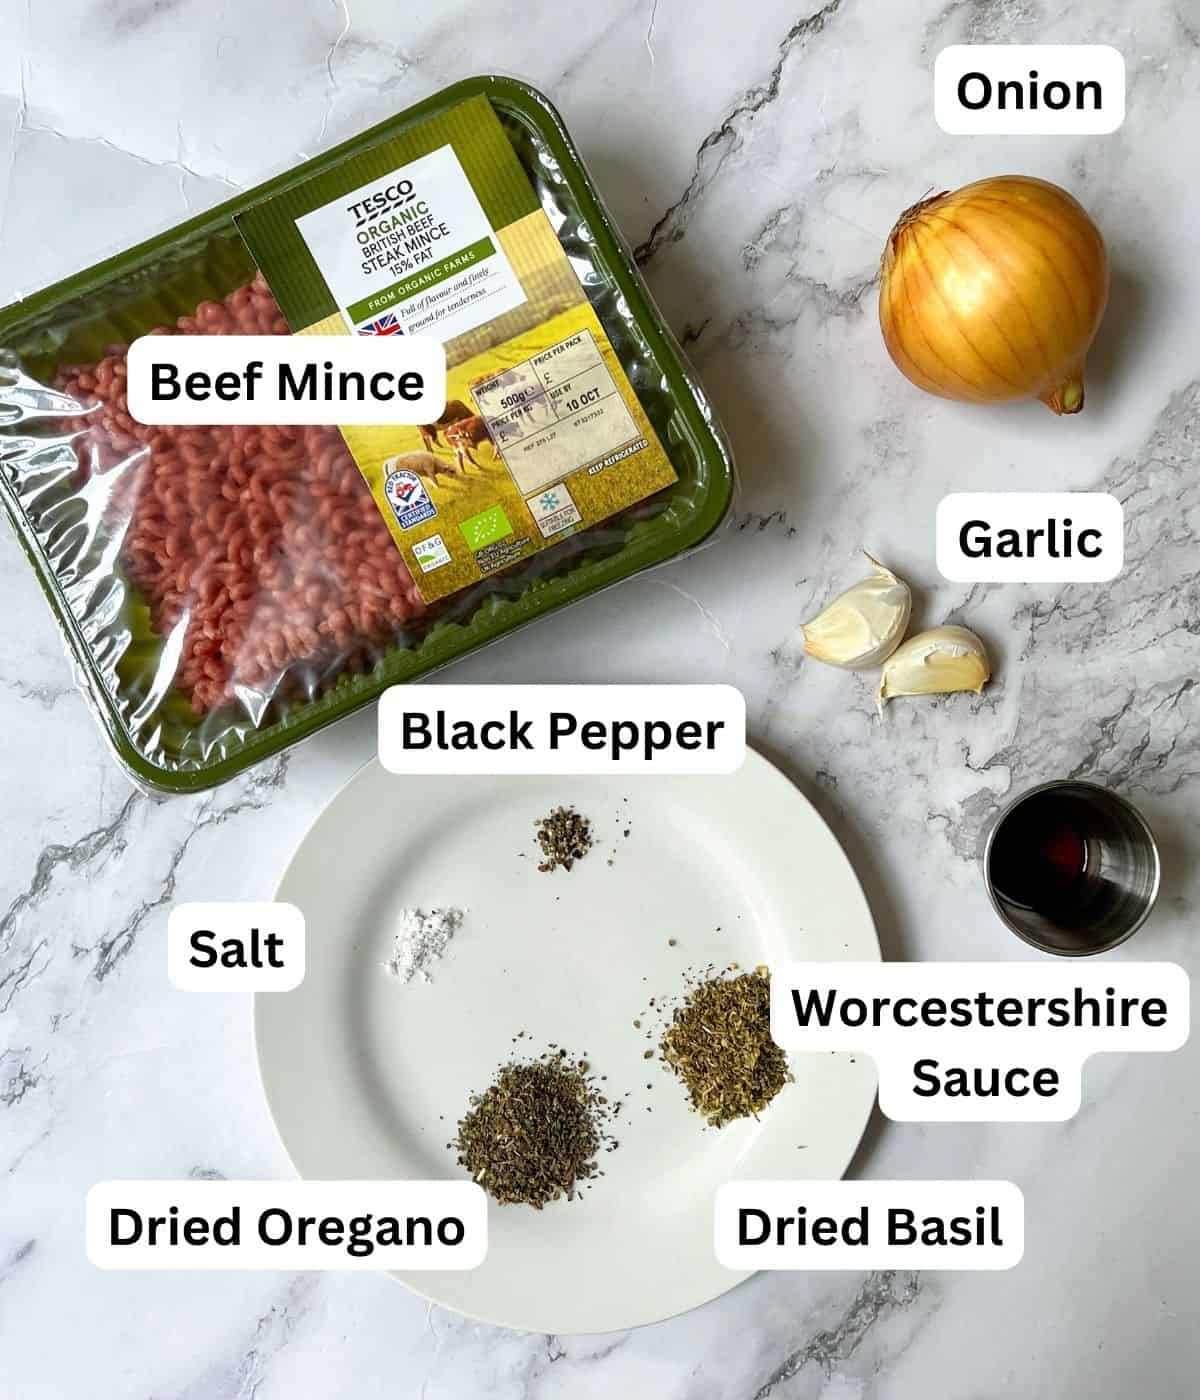 Ingredients laid out for eggless meatballs.